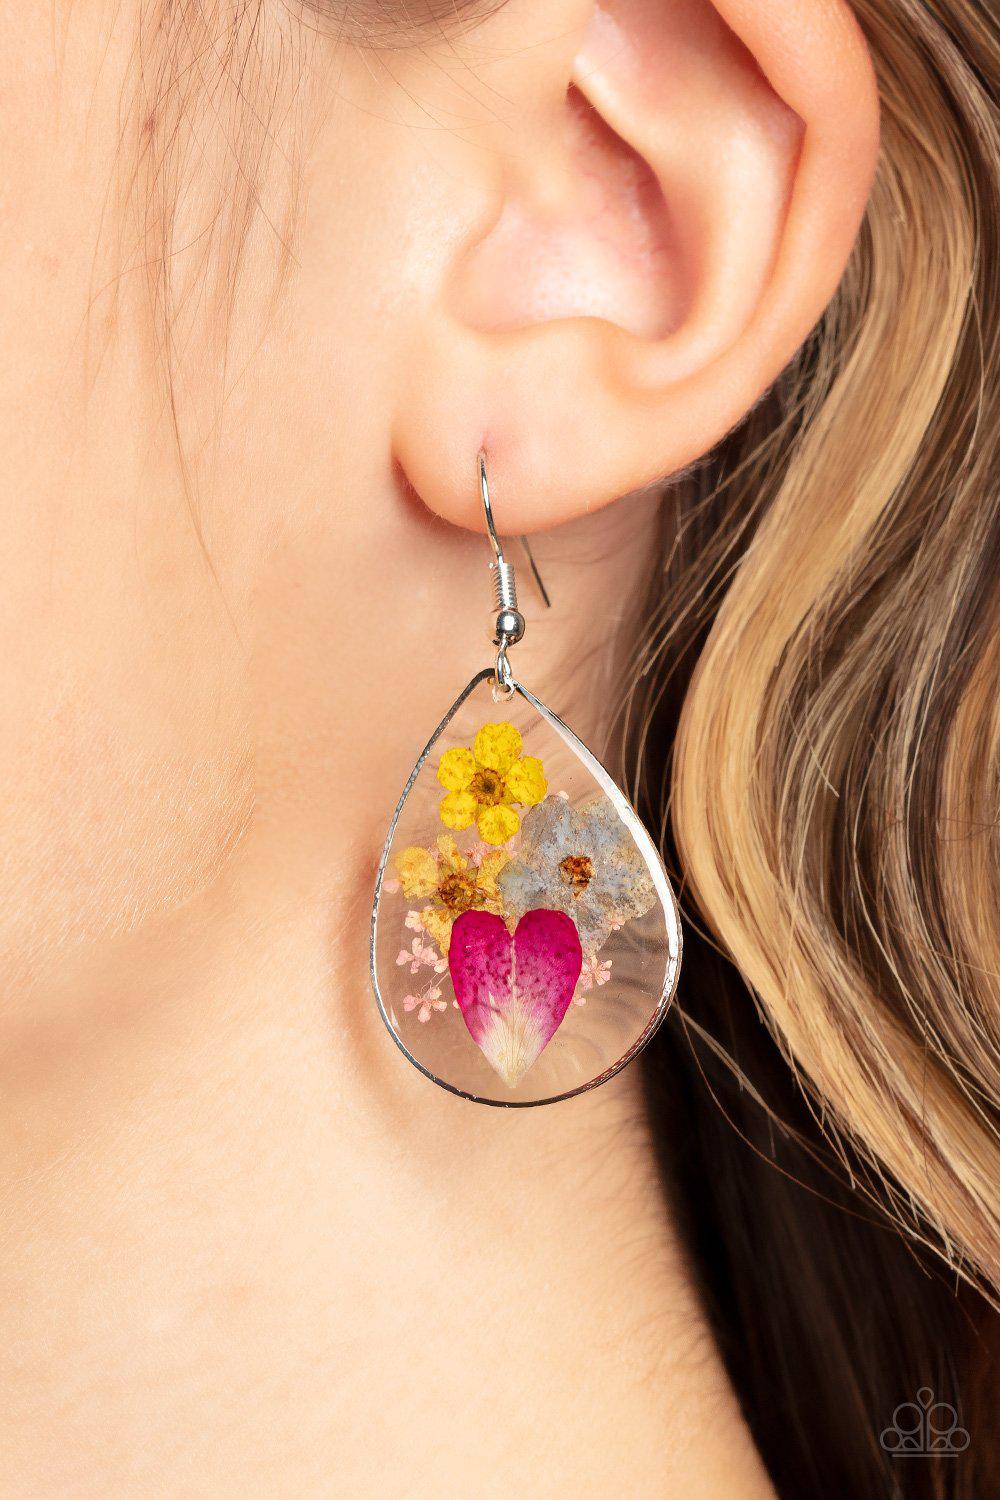 Prim and PRAIRIE Multi Pressed Flower Earrings - Paparazzi Accessories- lightbox - CarasShop.com - $5 Jewelry by Cara Jewels